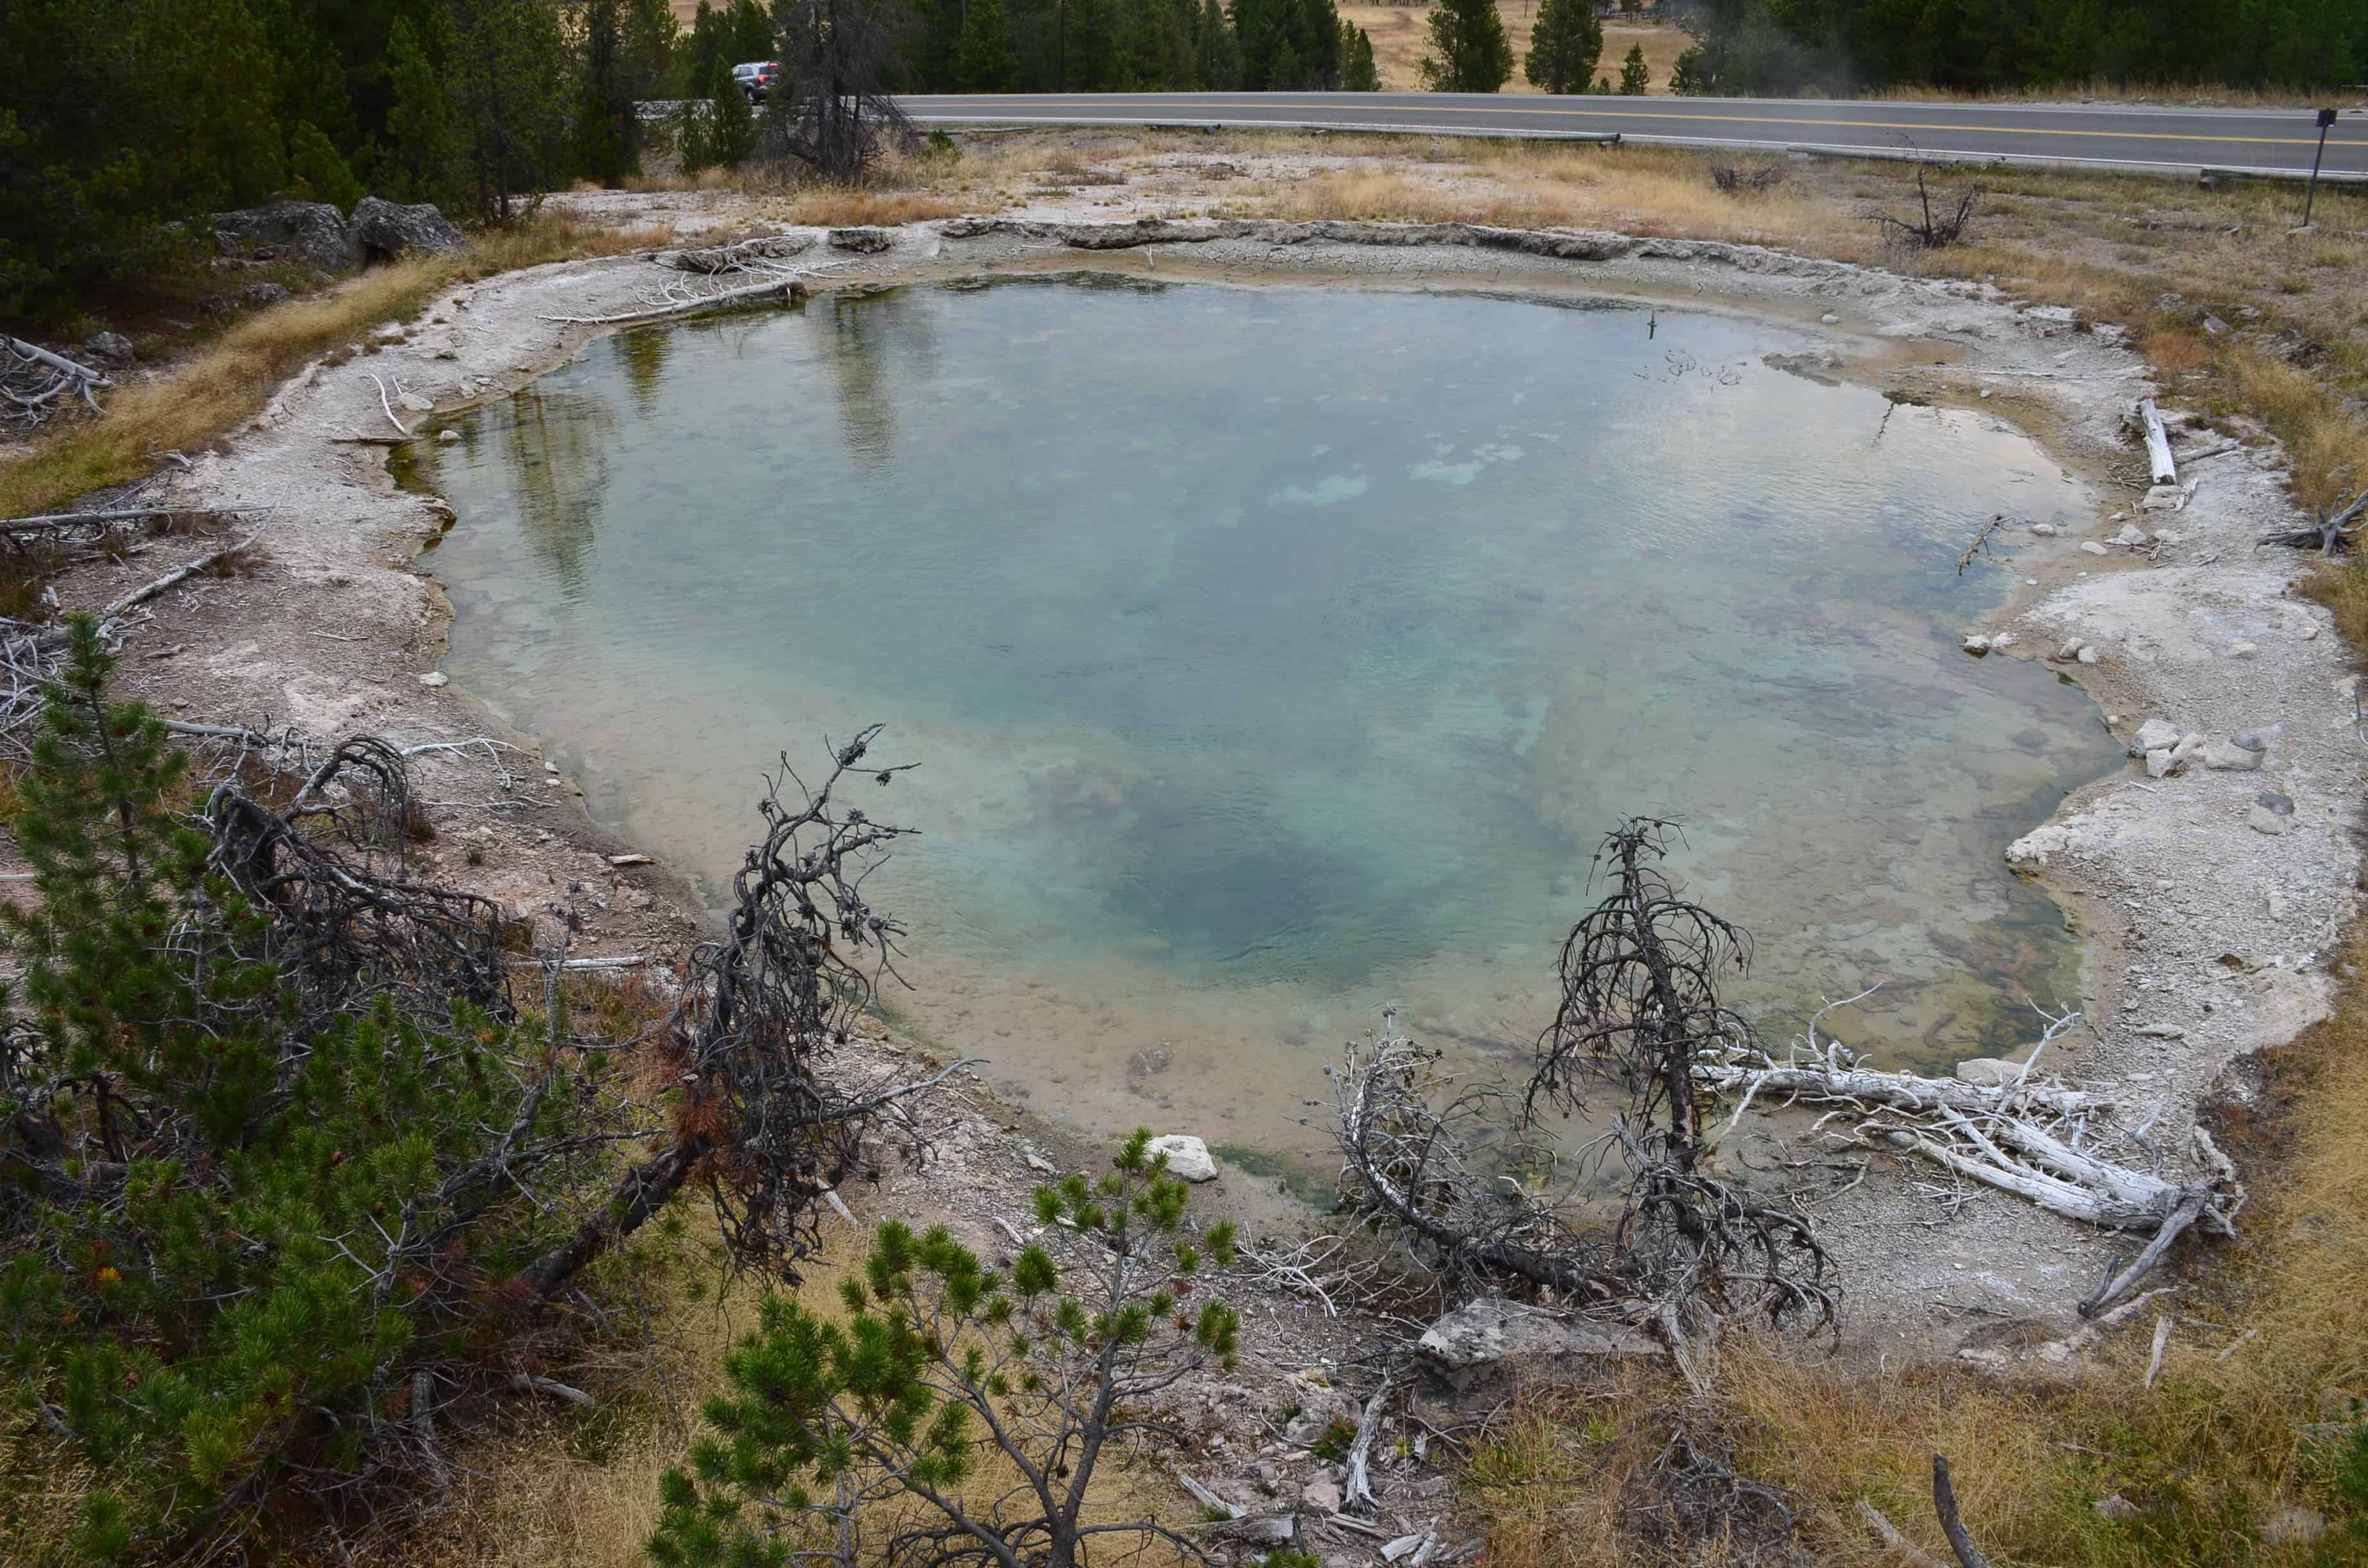 Leather Pool at the Lower Geyser Basin in Yellowstone National Park, Wyoming